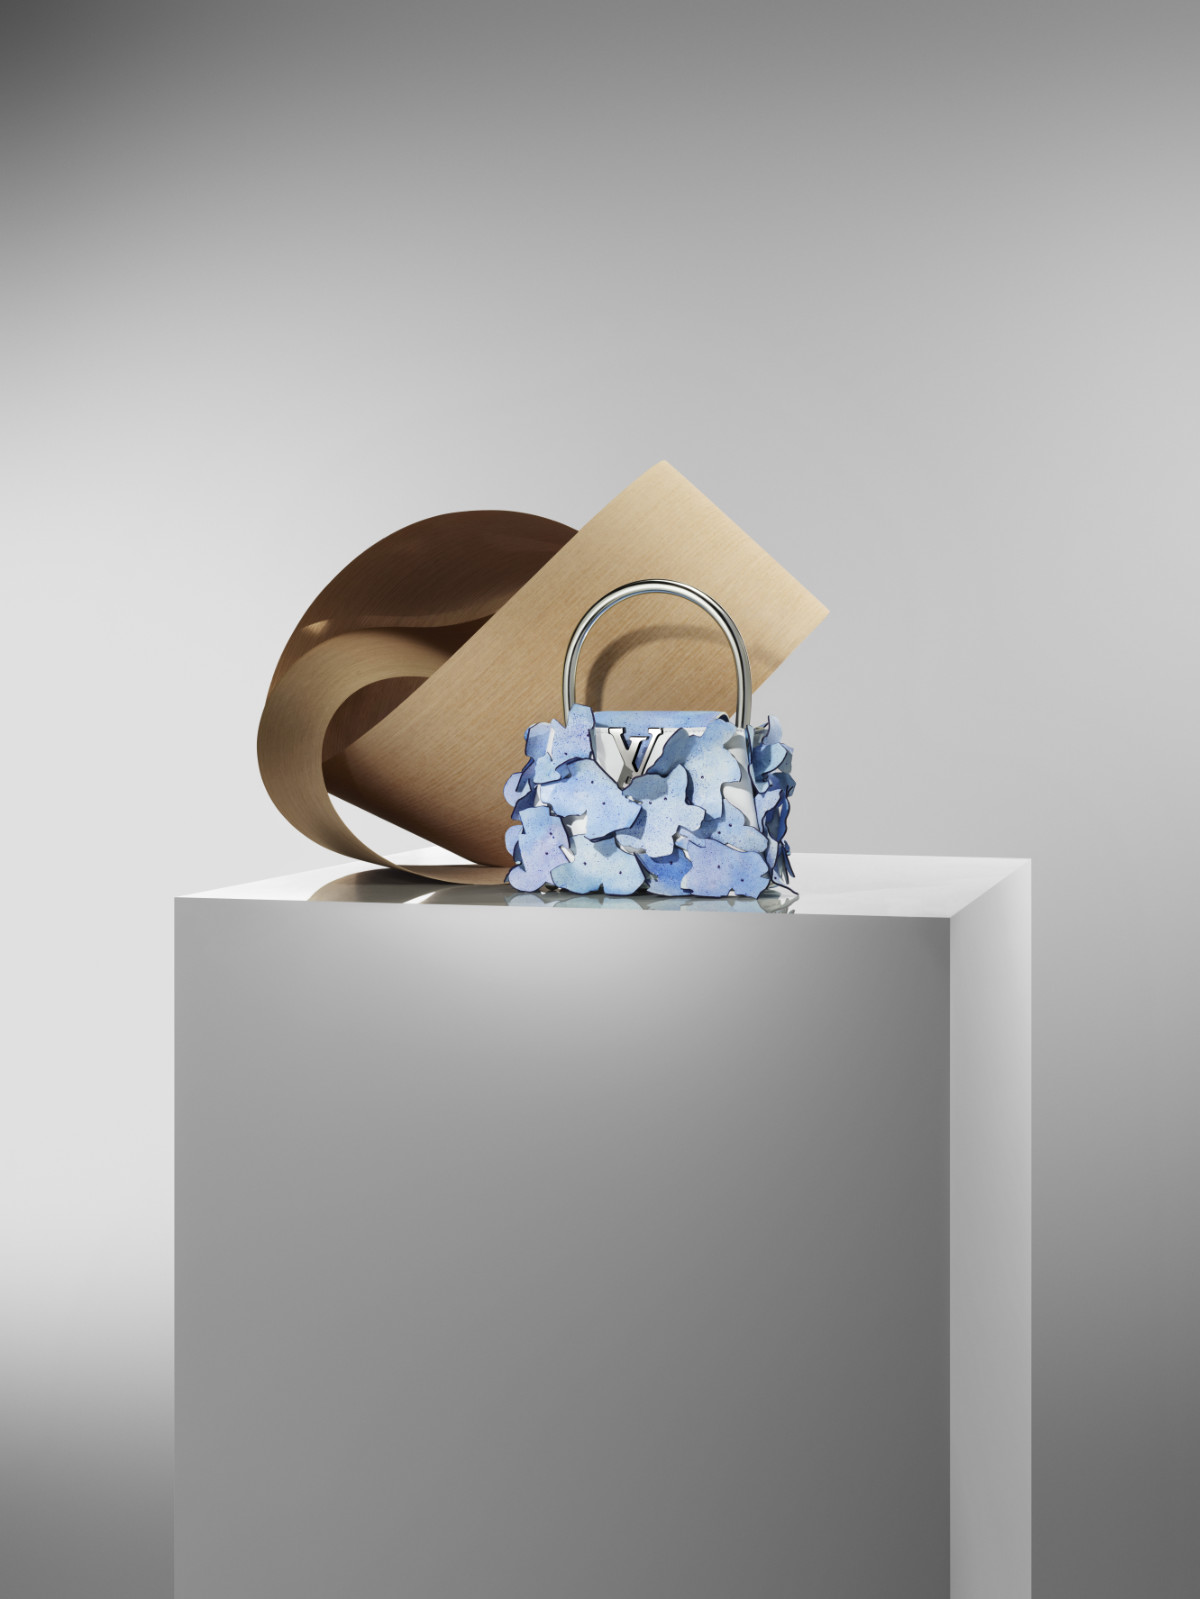 The Frank Gehry X Louis Vuitton Collection